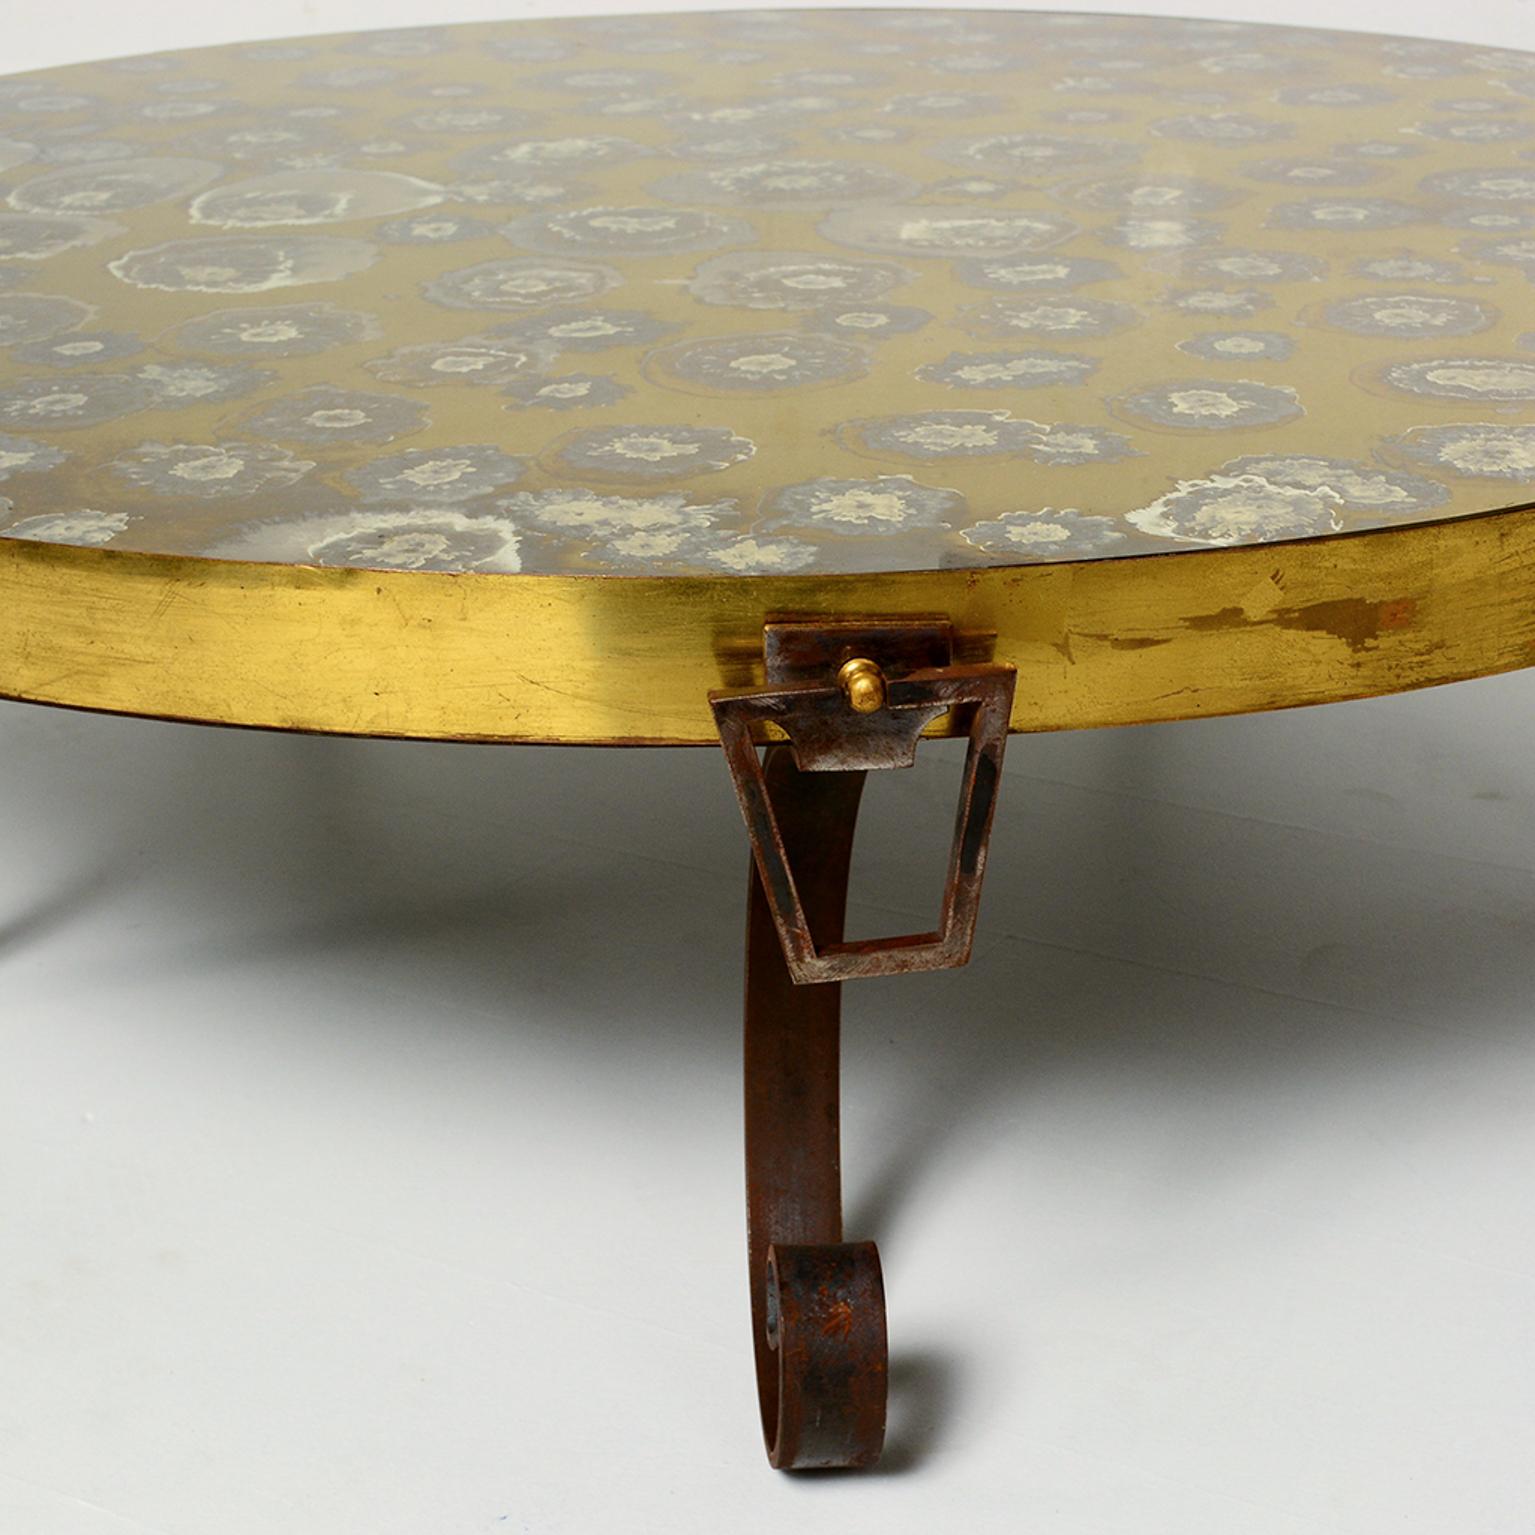 For your consideration: Arturo Pani 1950s elegant Mexican Modernism with a vintage round cocktail / coffee table in églomisé mirror, patinated brass, forged iron with sculptural flared legs. Sculptural golden elegance.

Dimensions: Height 13.5 in.